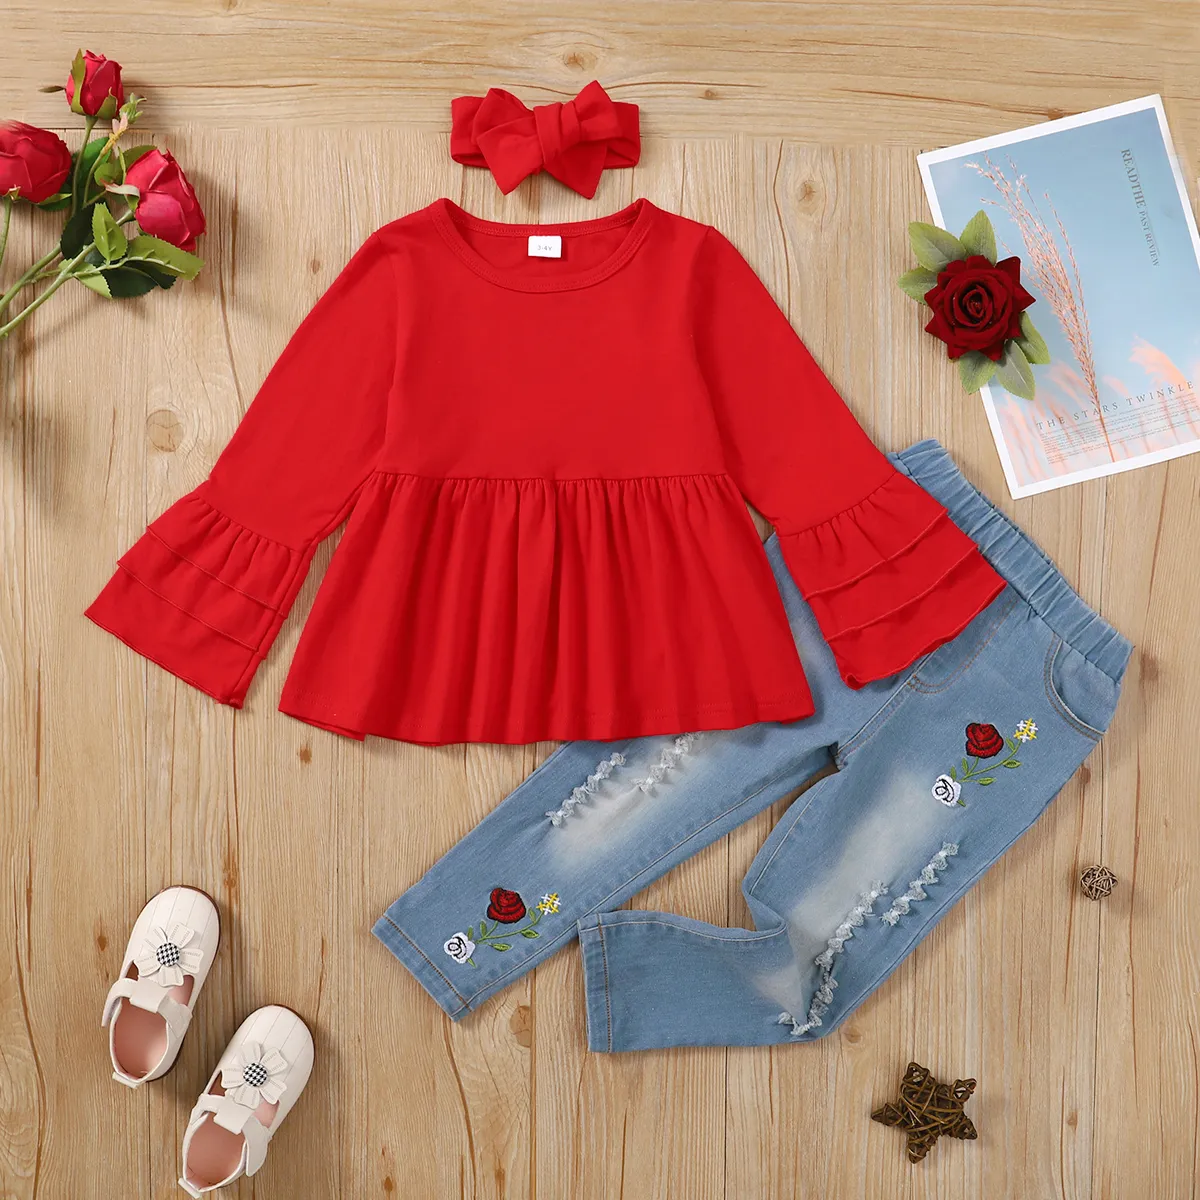 2pcs Toddler Girl Floral Embroidered Cotton Denim Jeans and Bell sleeves Tee Set Red big image 1